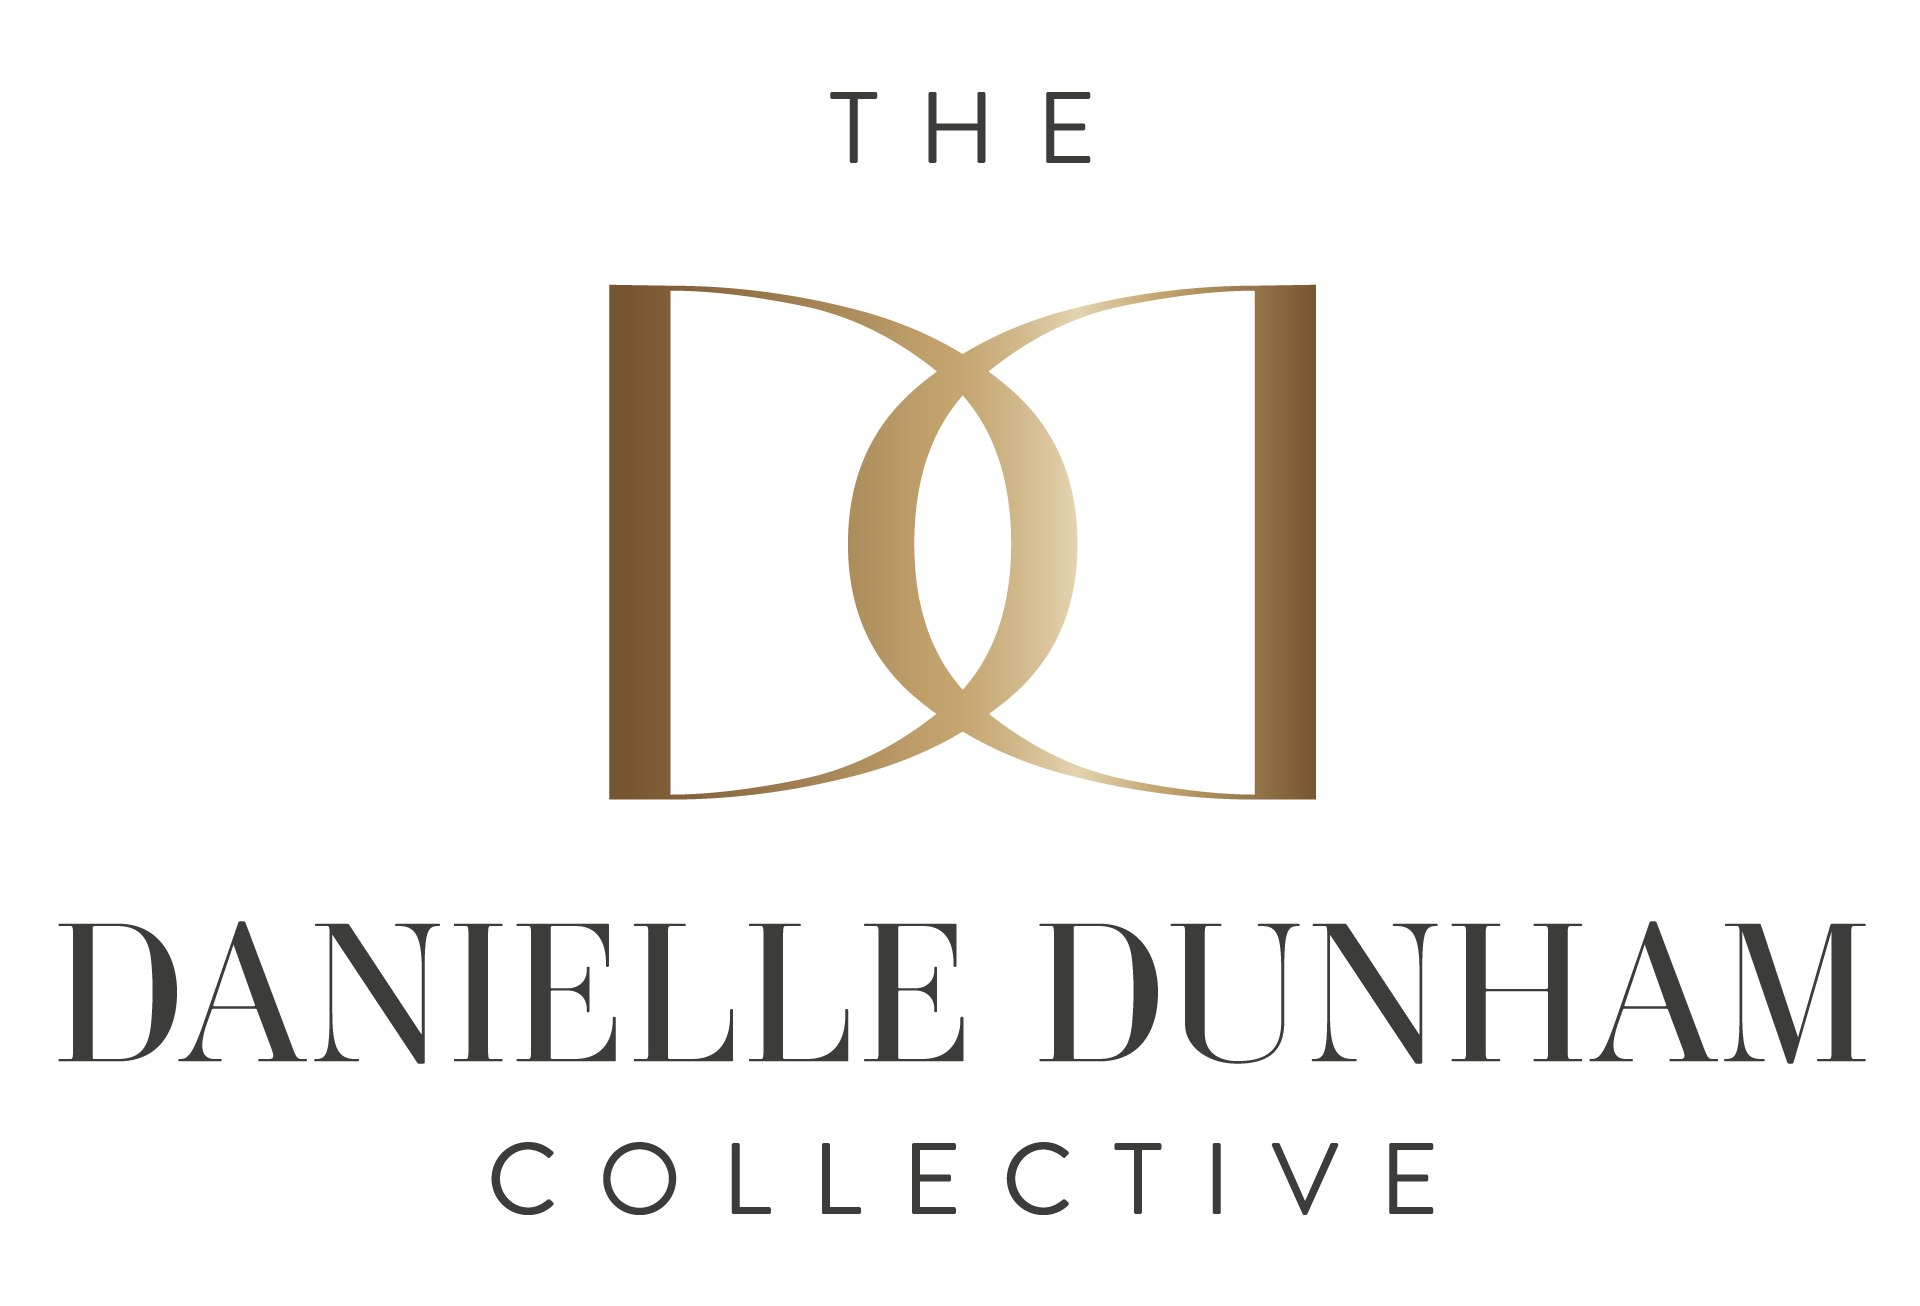 The Danielle Dunham Collective | A Collection of Remarkable Realtors in Detroit, Michigan